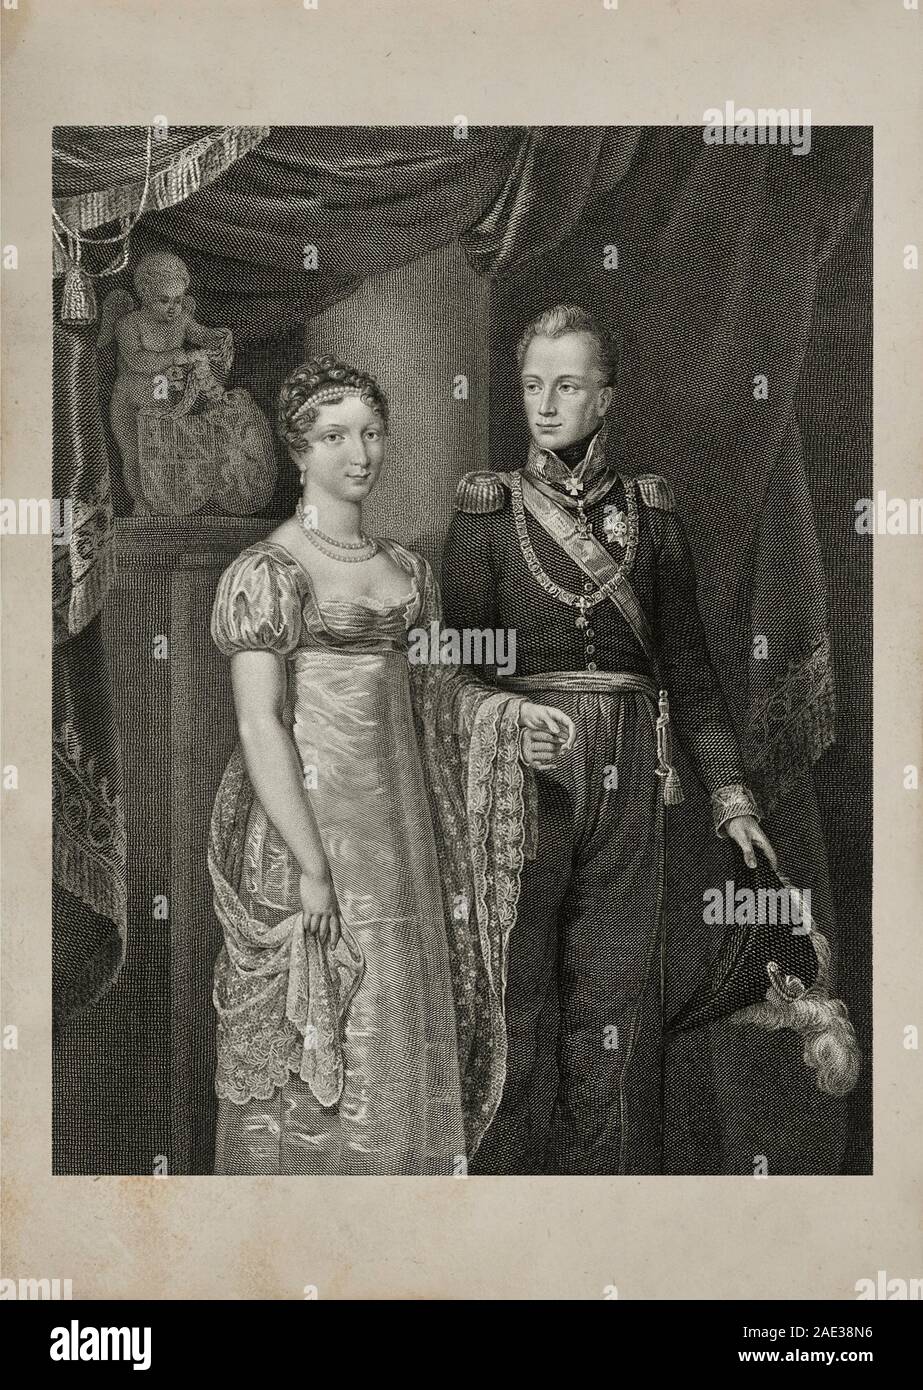 Engraving of William II (1792 – 1849) King of the Netherlands, Grand Duke of Luxembourg and Grand Duchess Anna Pavlovna of Russia (1795 - 1865). Stock Photo